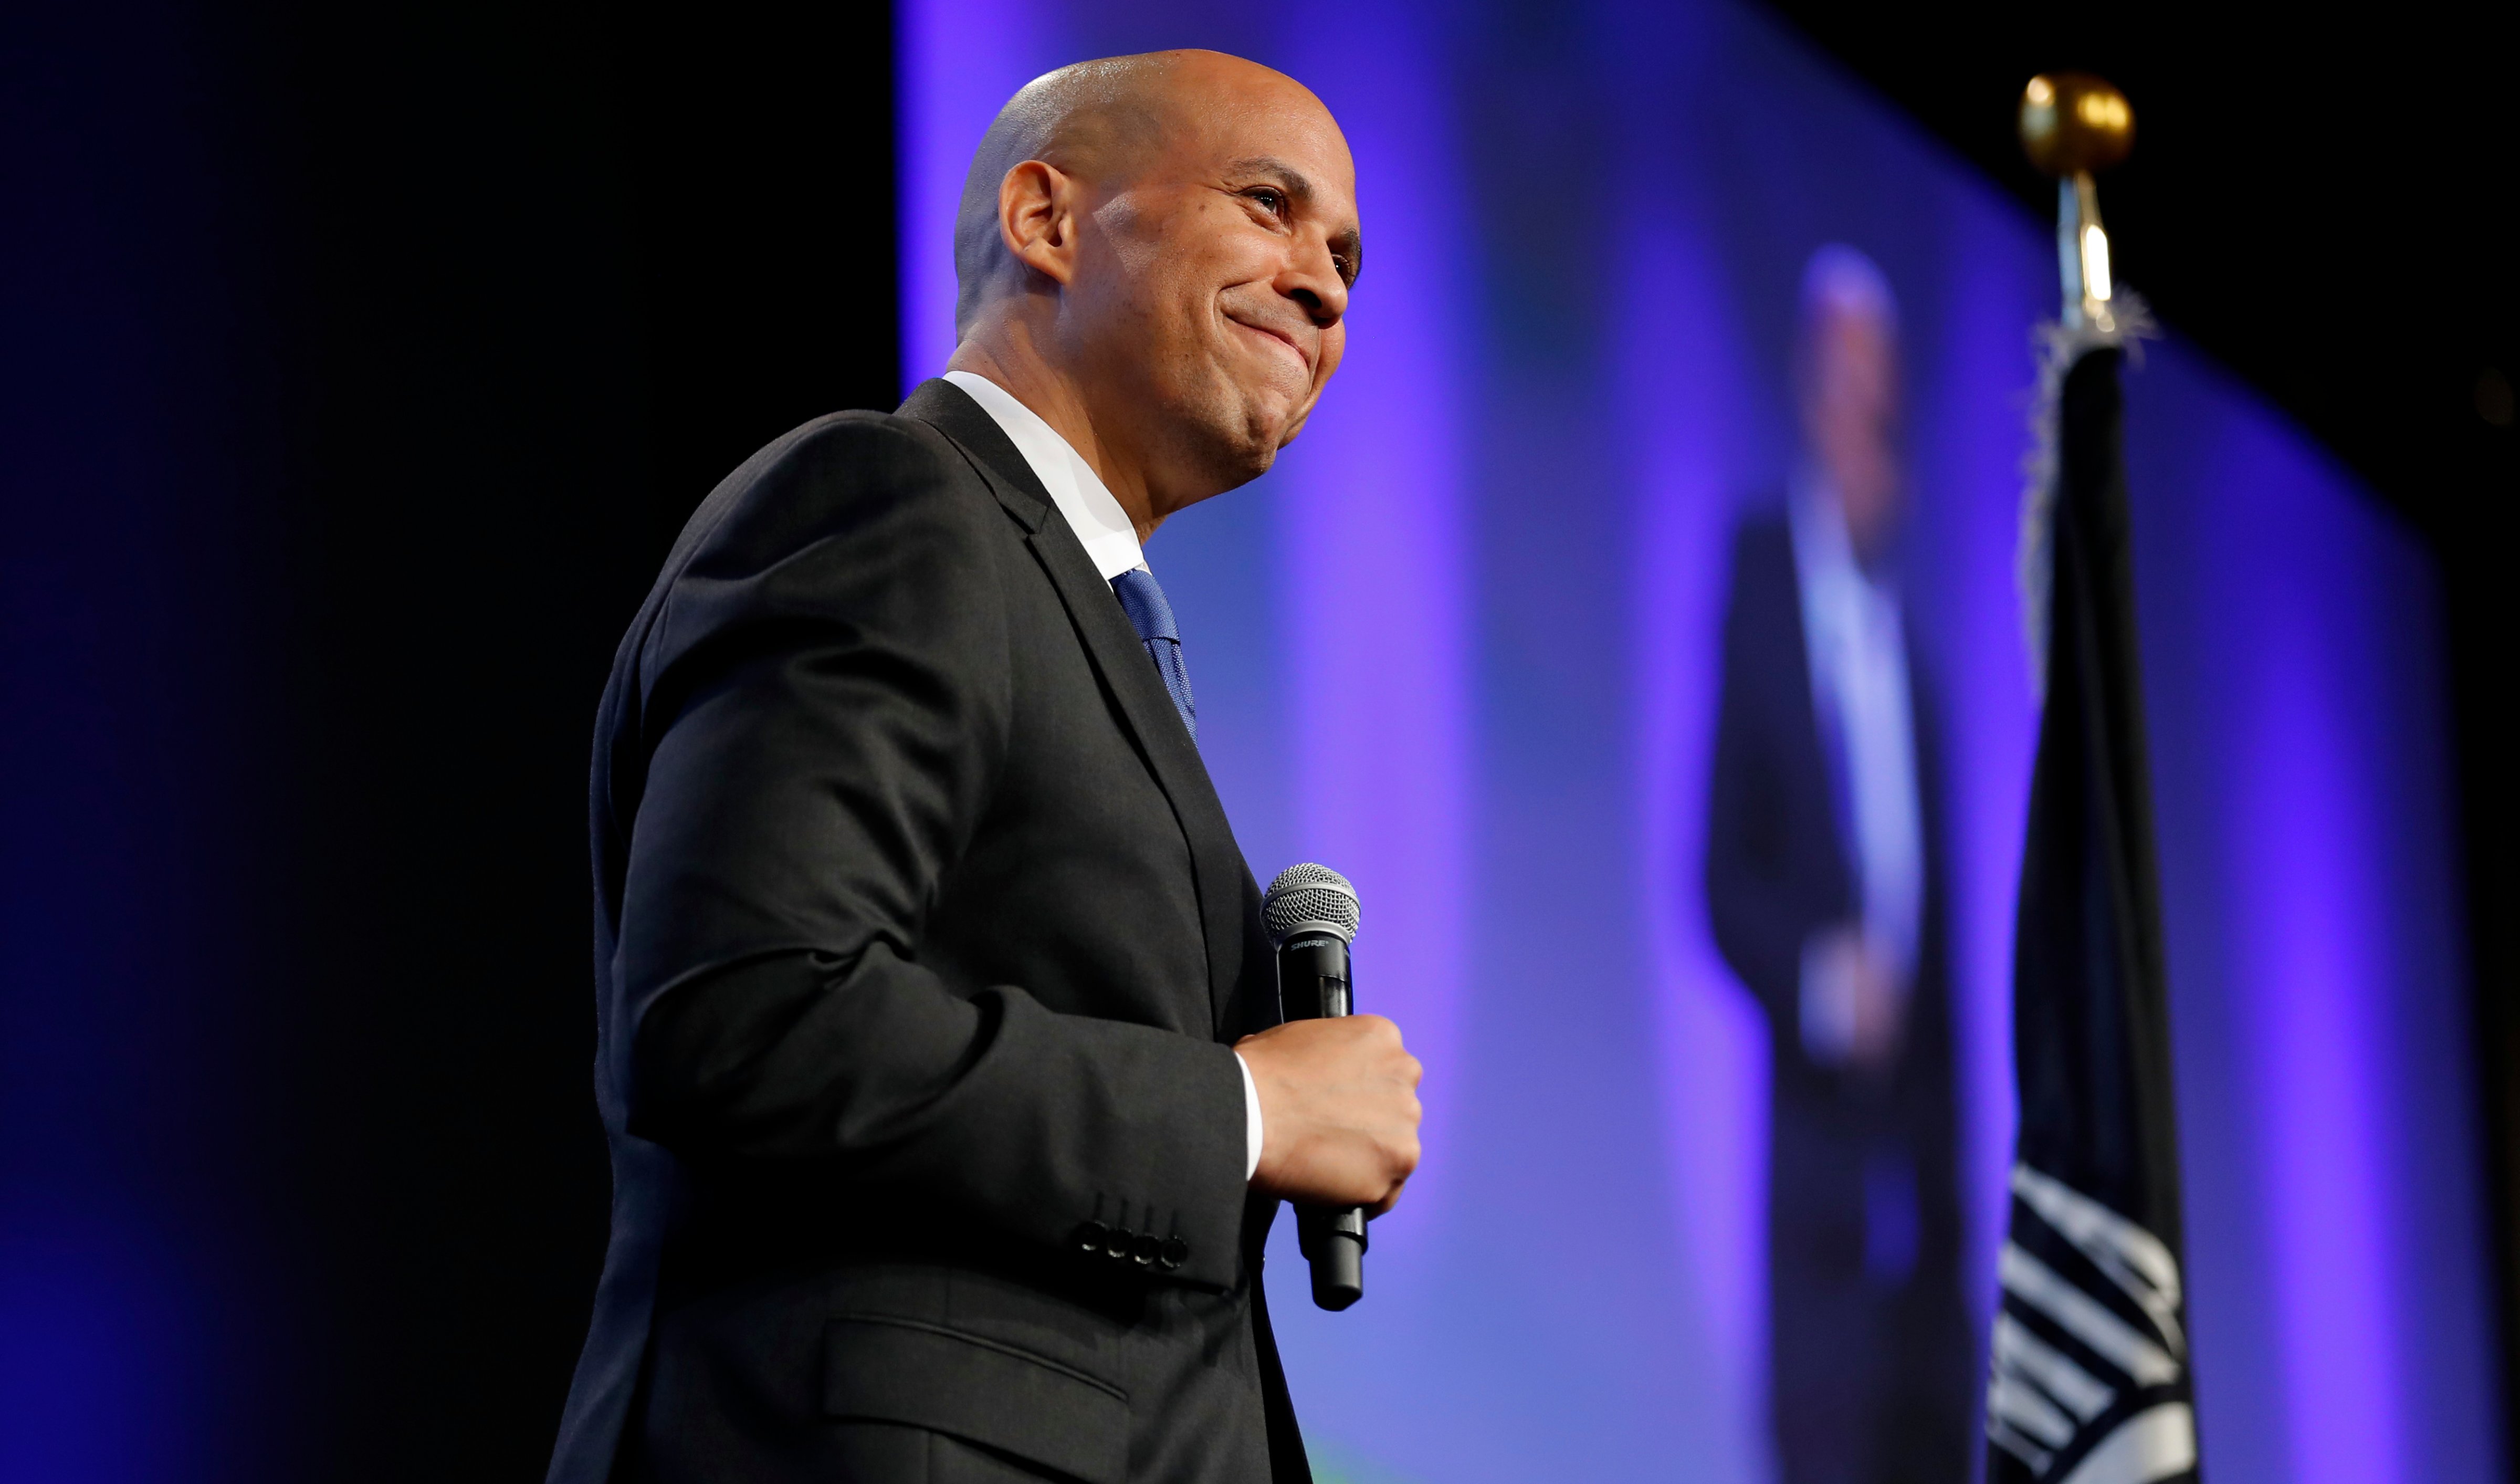 U.S. Sen. Cory Booker, D-N.J., speaks during the Iowa Democratic Party's annual Fall Gala, in Des Moines, Iowa, on Oct. 6, 2018. (Charlie Neibergall—AP/REX/Shutterstock)